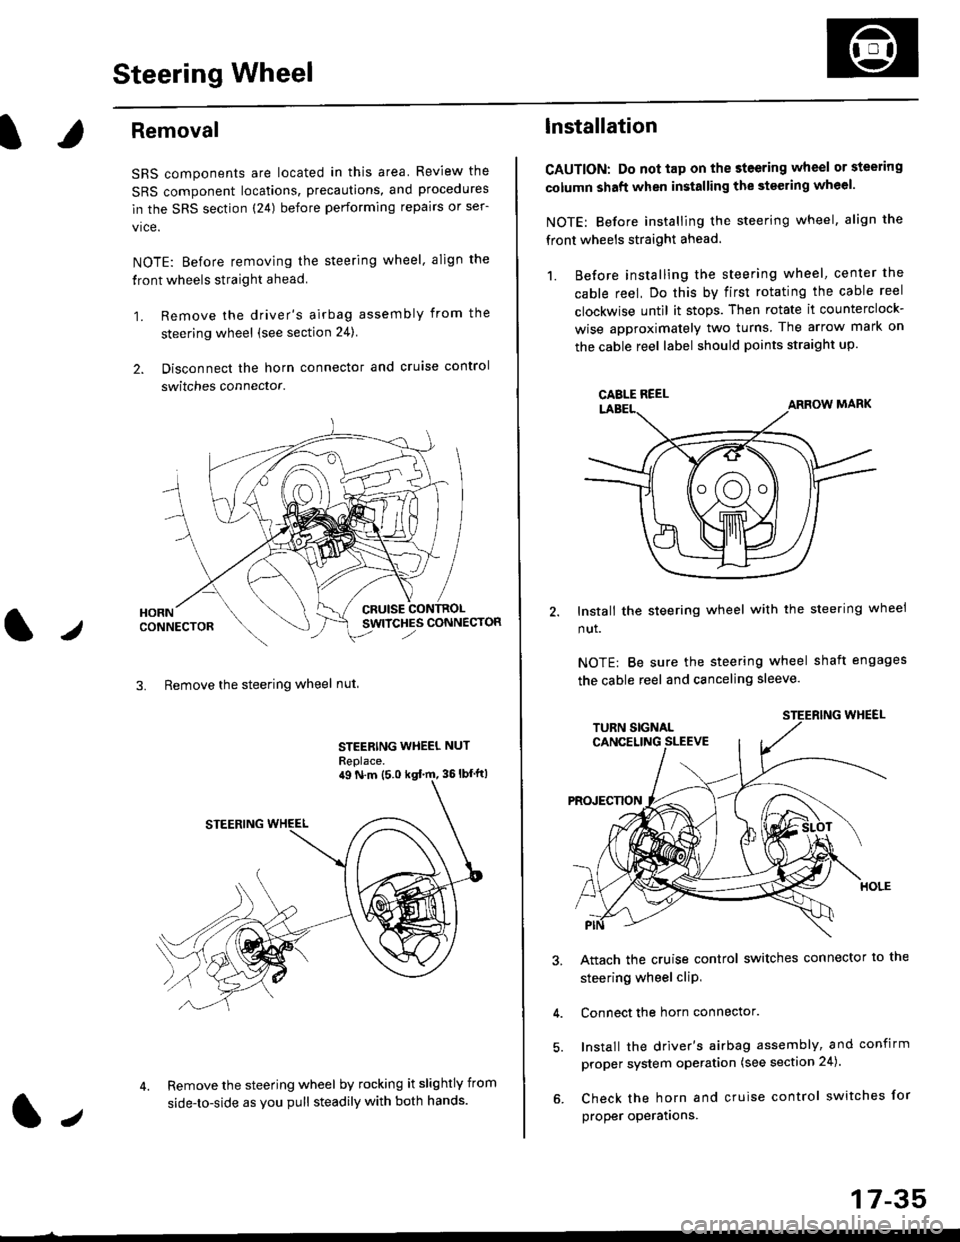 HONDA CIVIC 1997 6.G Workshop Manual Steering Wheel
l,/
Removal
SRS components are located in this area Review the
SRS component locations, precautions, and procedures
in the SRS section (24) before performing repairs or ser-
vice.
NOTE: